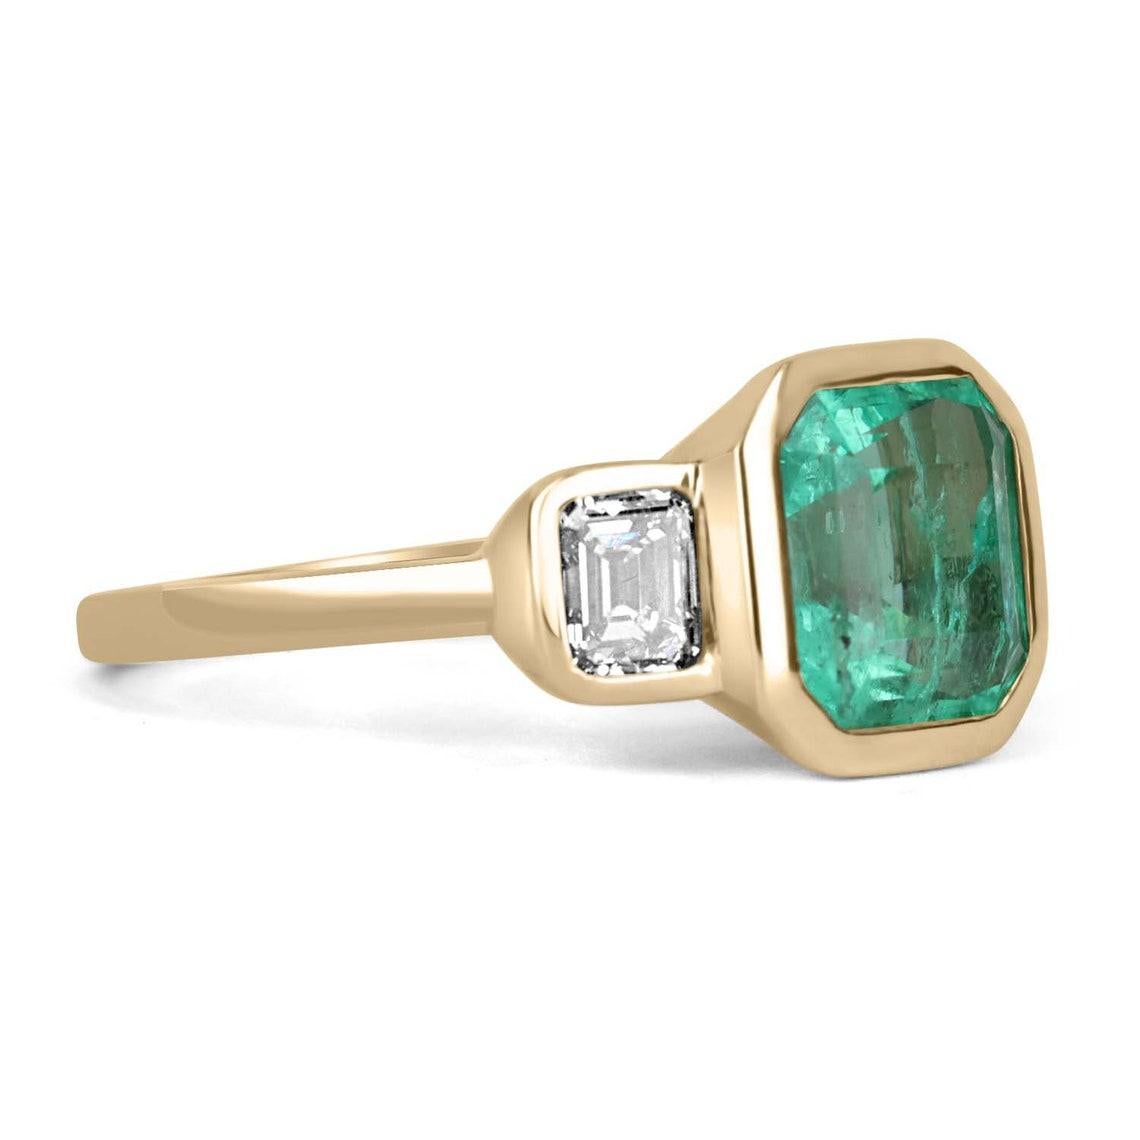 Dexterously handcrafted in gleaming 18K yellow gold, this ring features a high quality, 3.30-carat natural Colombian emerald Asscher cut from the famous Muzo mines. Set in a secure bezel setting for extra protection. This extraordinary emerald has